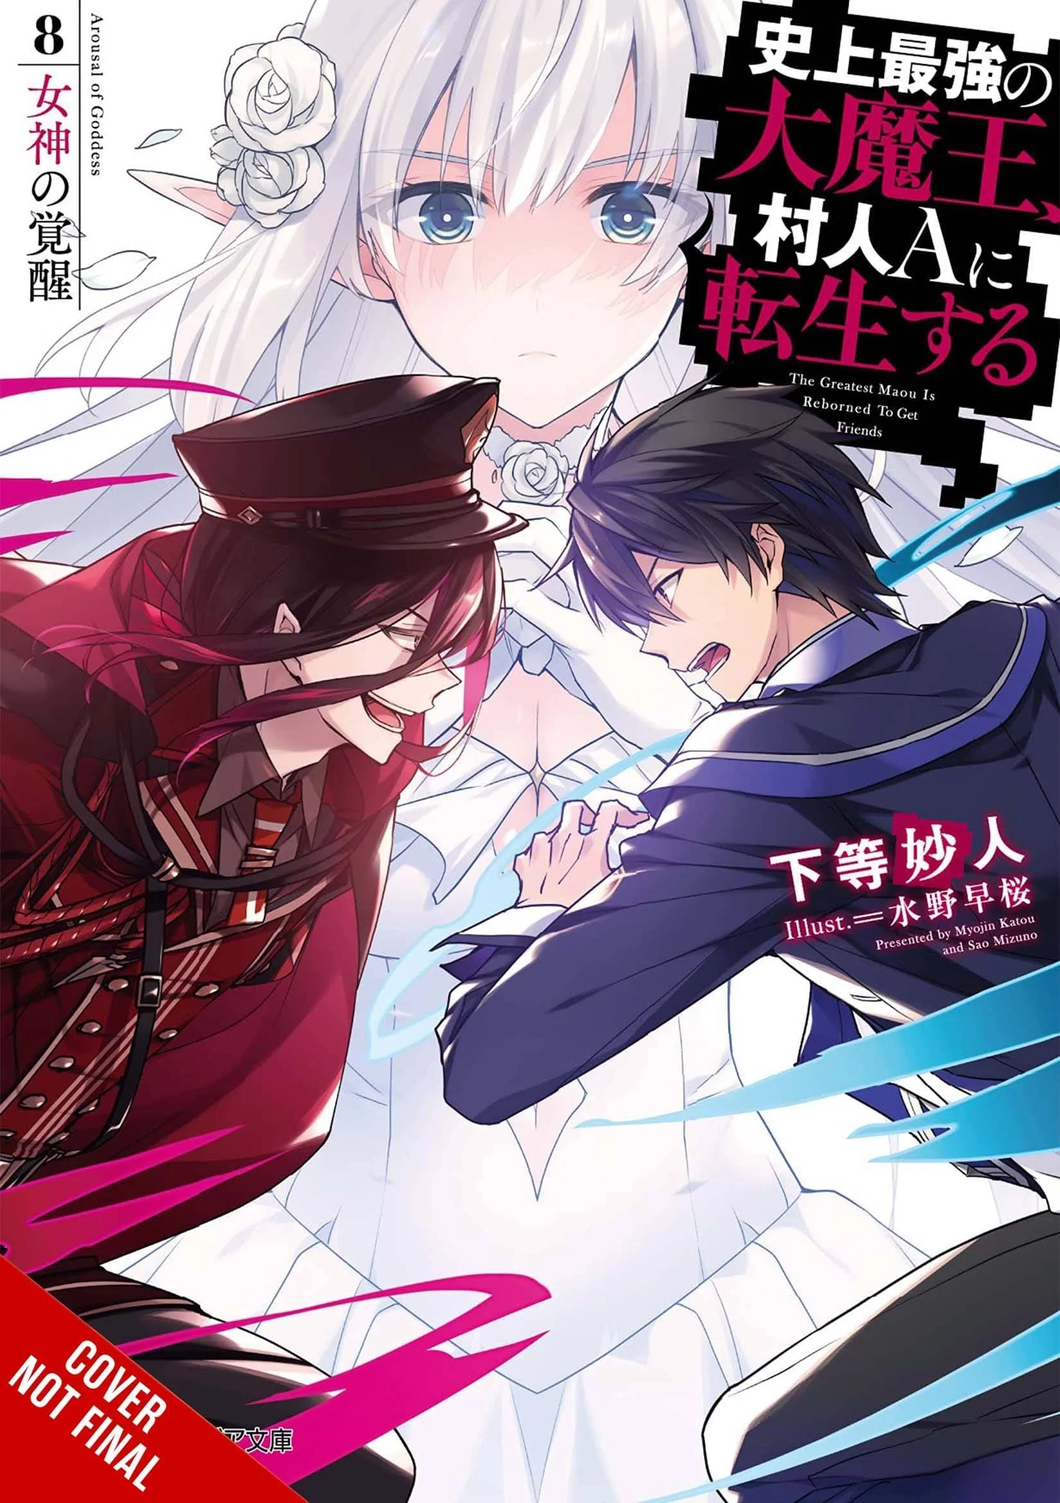 The Greatest Demon Lord Is Reborn as a Typical Nobody Light Novel Vol 08